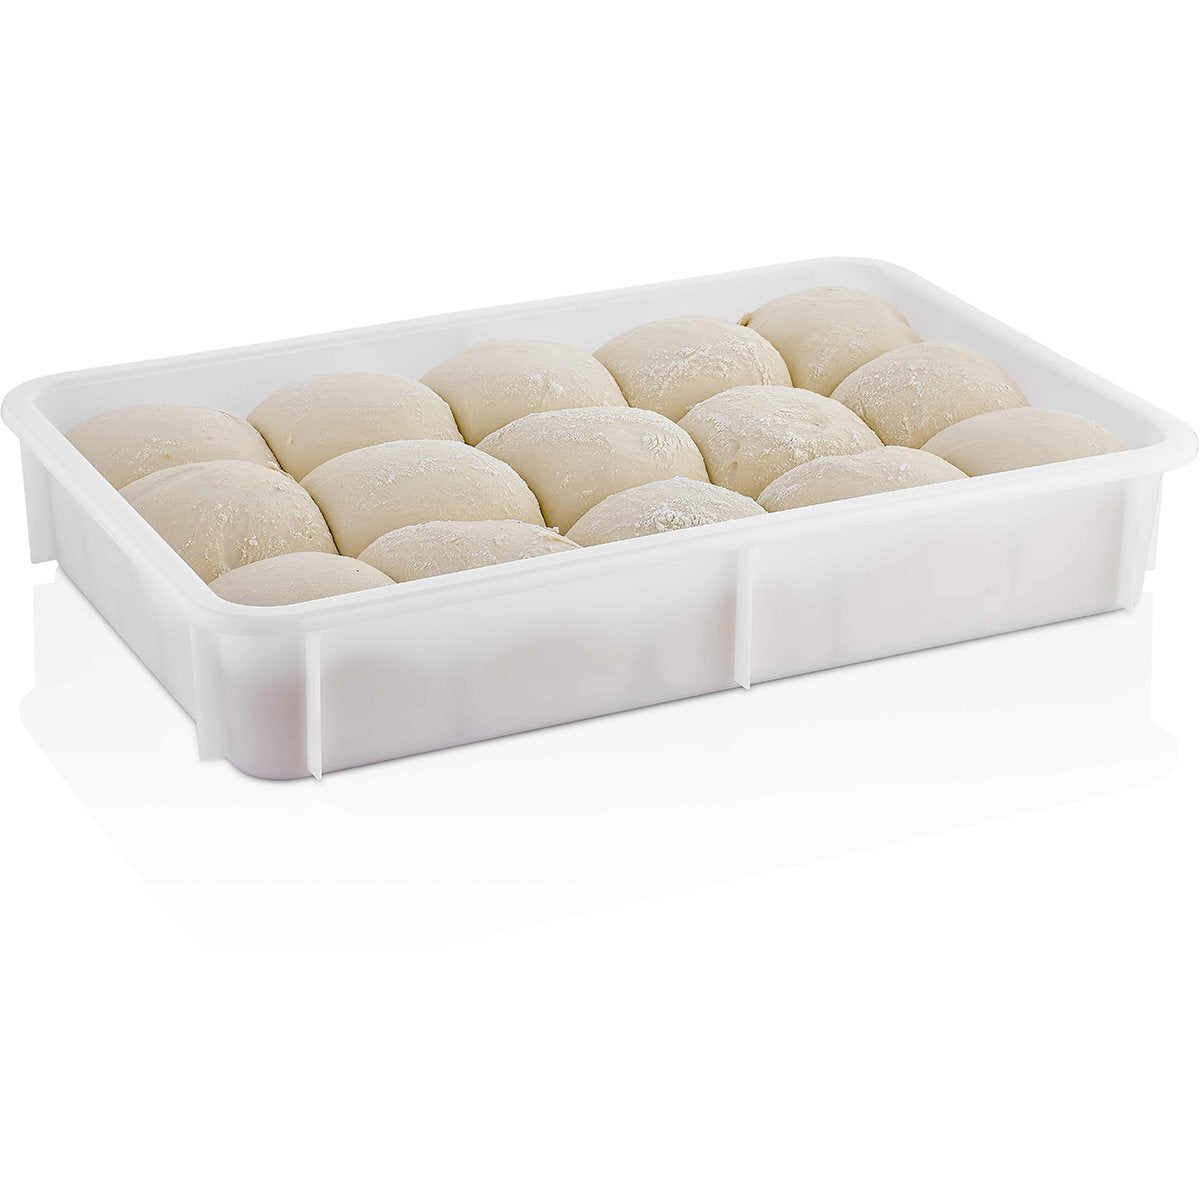 Pizza Dough Box 760x450x12mm Polypropylene.Product Ref:00499.🚚 1-3 Days Delivery